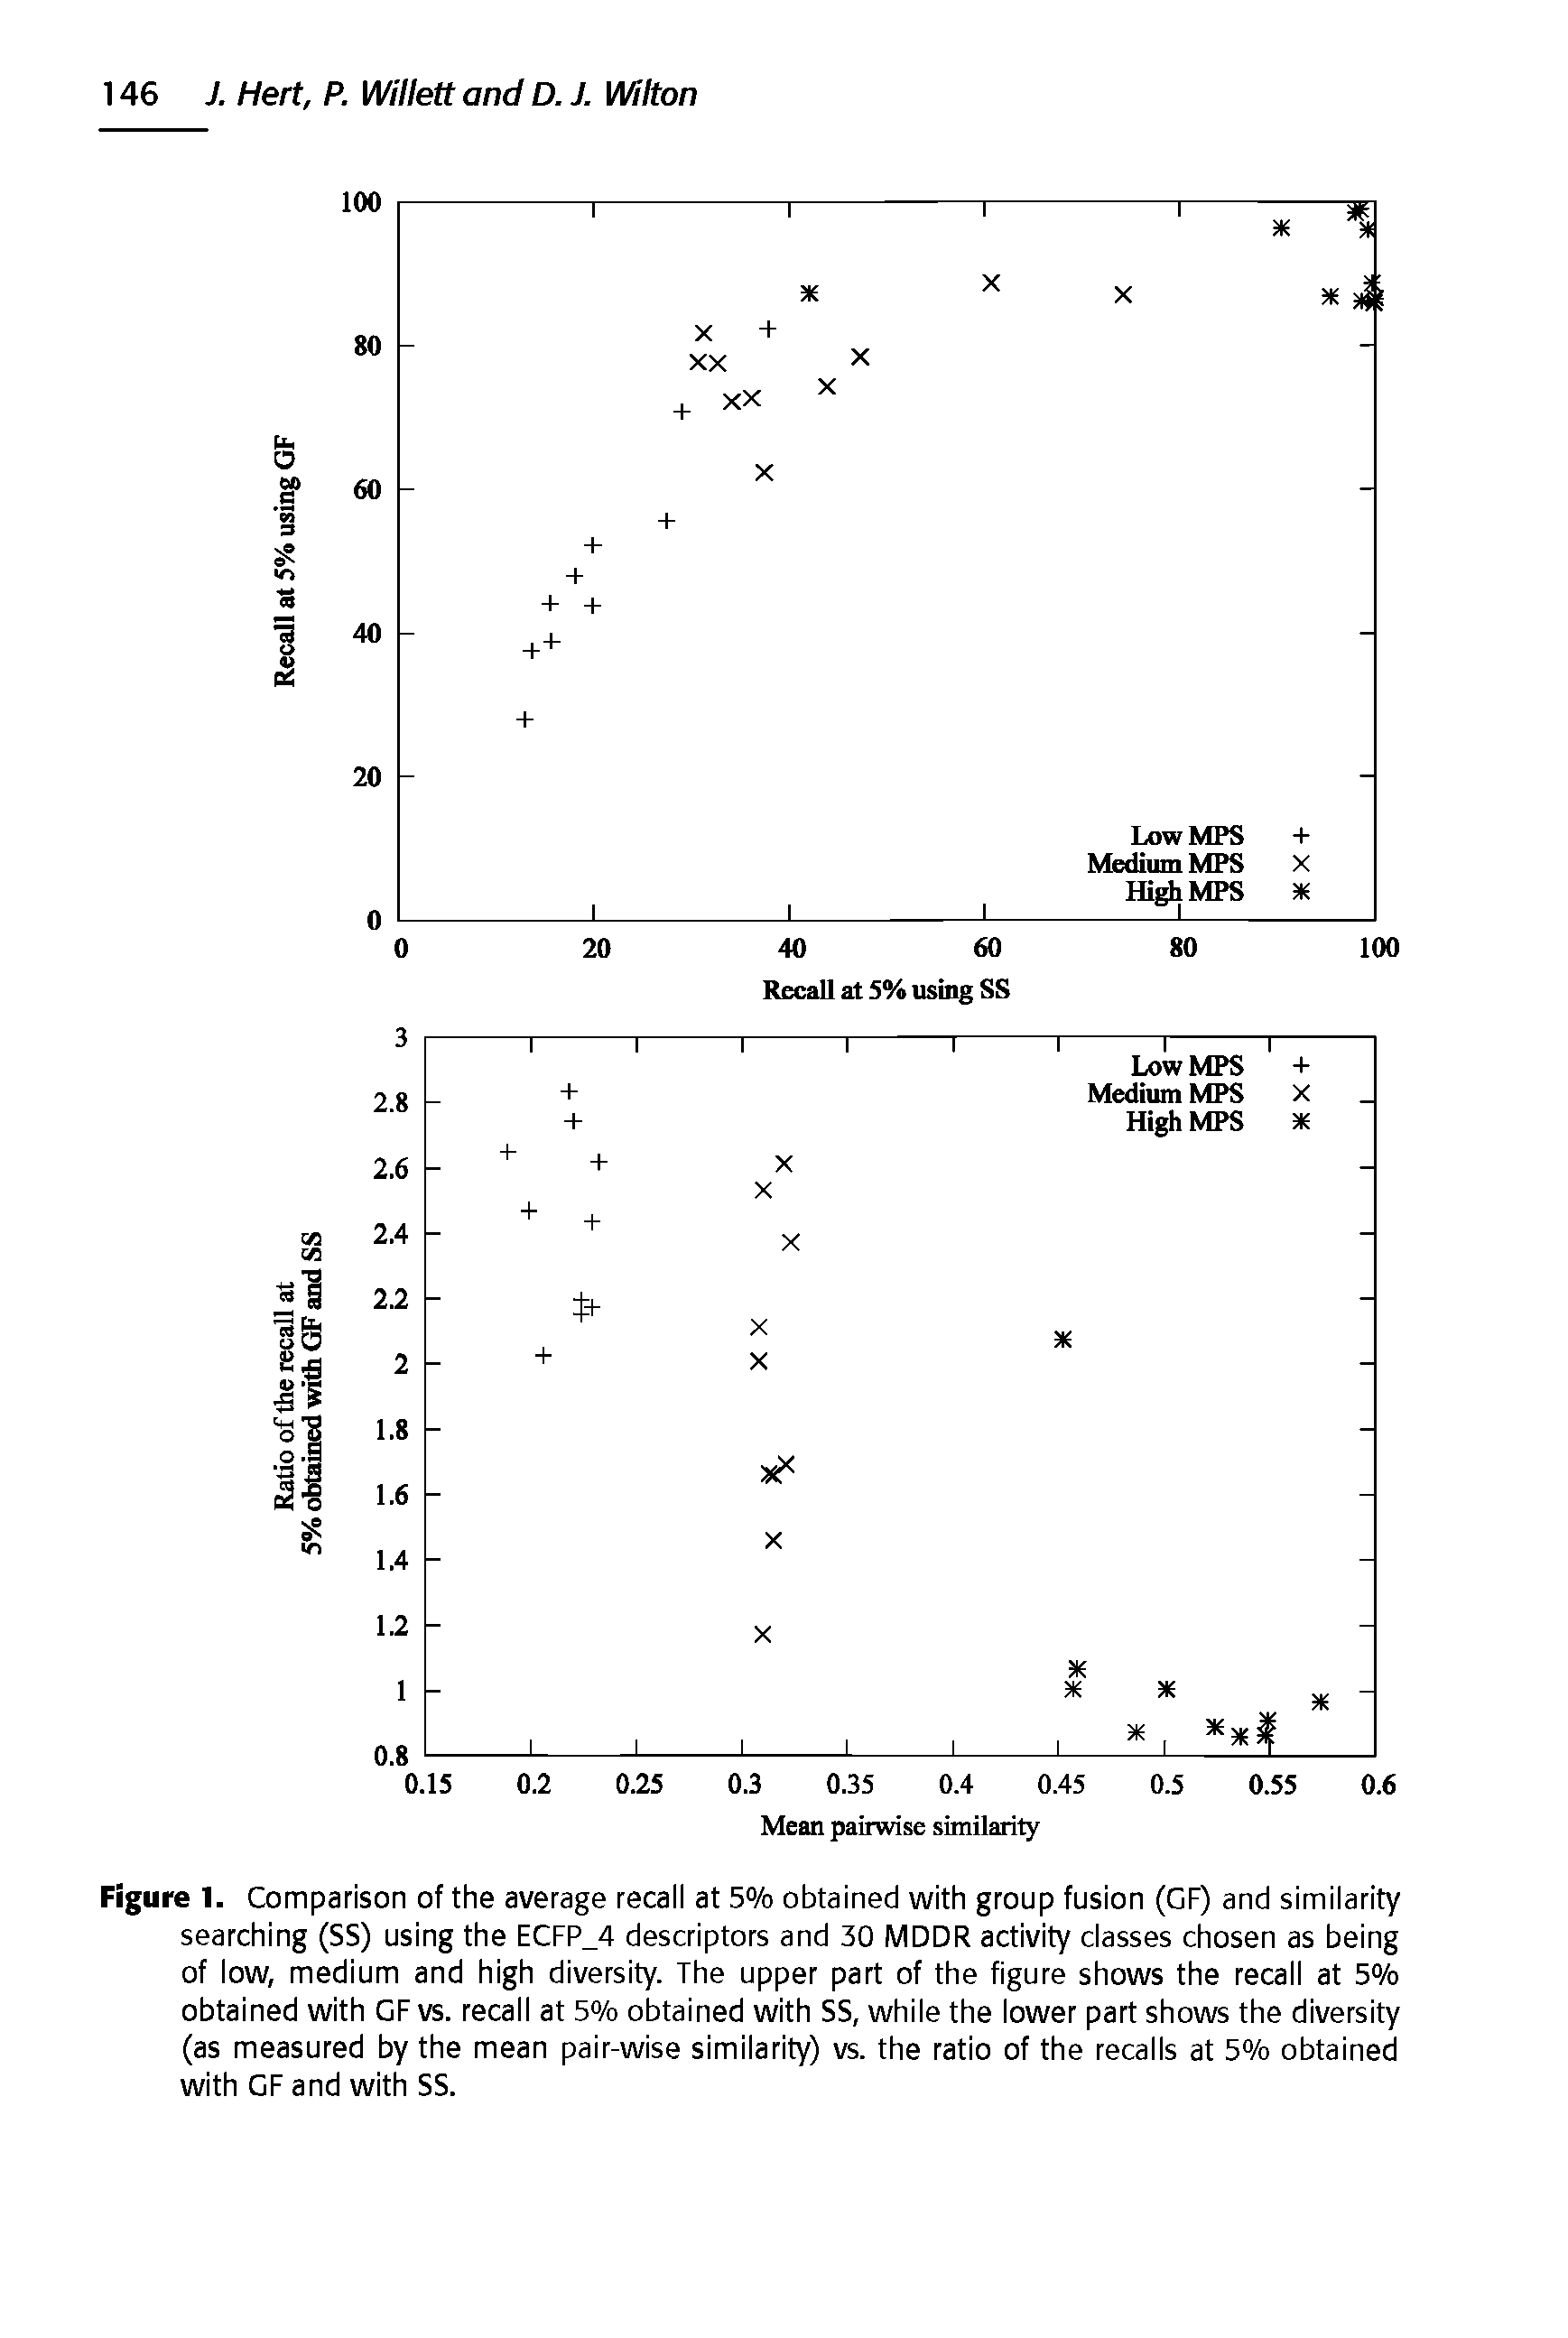 Figure 1. Comparison of the average recall at 5% obtained with group fusion (GF) and similarity searching (SS) using the ECFP 4 descriptors and 30 MDDR activity classes chosen as being of low, medium and high diversity. The upper part of the figure shows the recall at 5% obtained with GF vs. recall at 5% obtained with SS, while the lower part shows the diversity (as measured by the mean pair-wise similarity) vs. the ratio of the recalls at 5% obtained with GF and with SS.